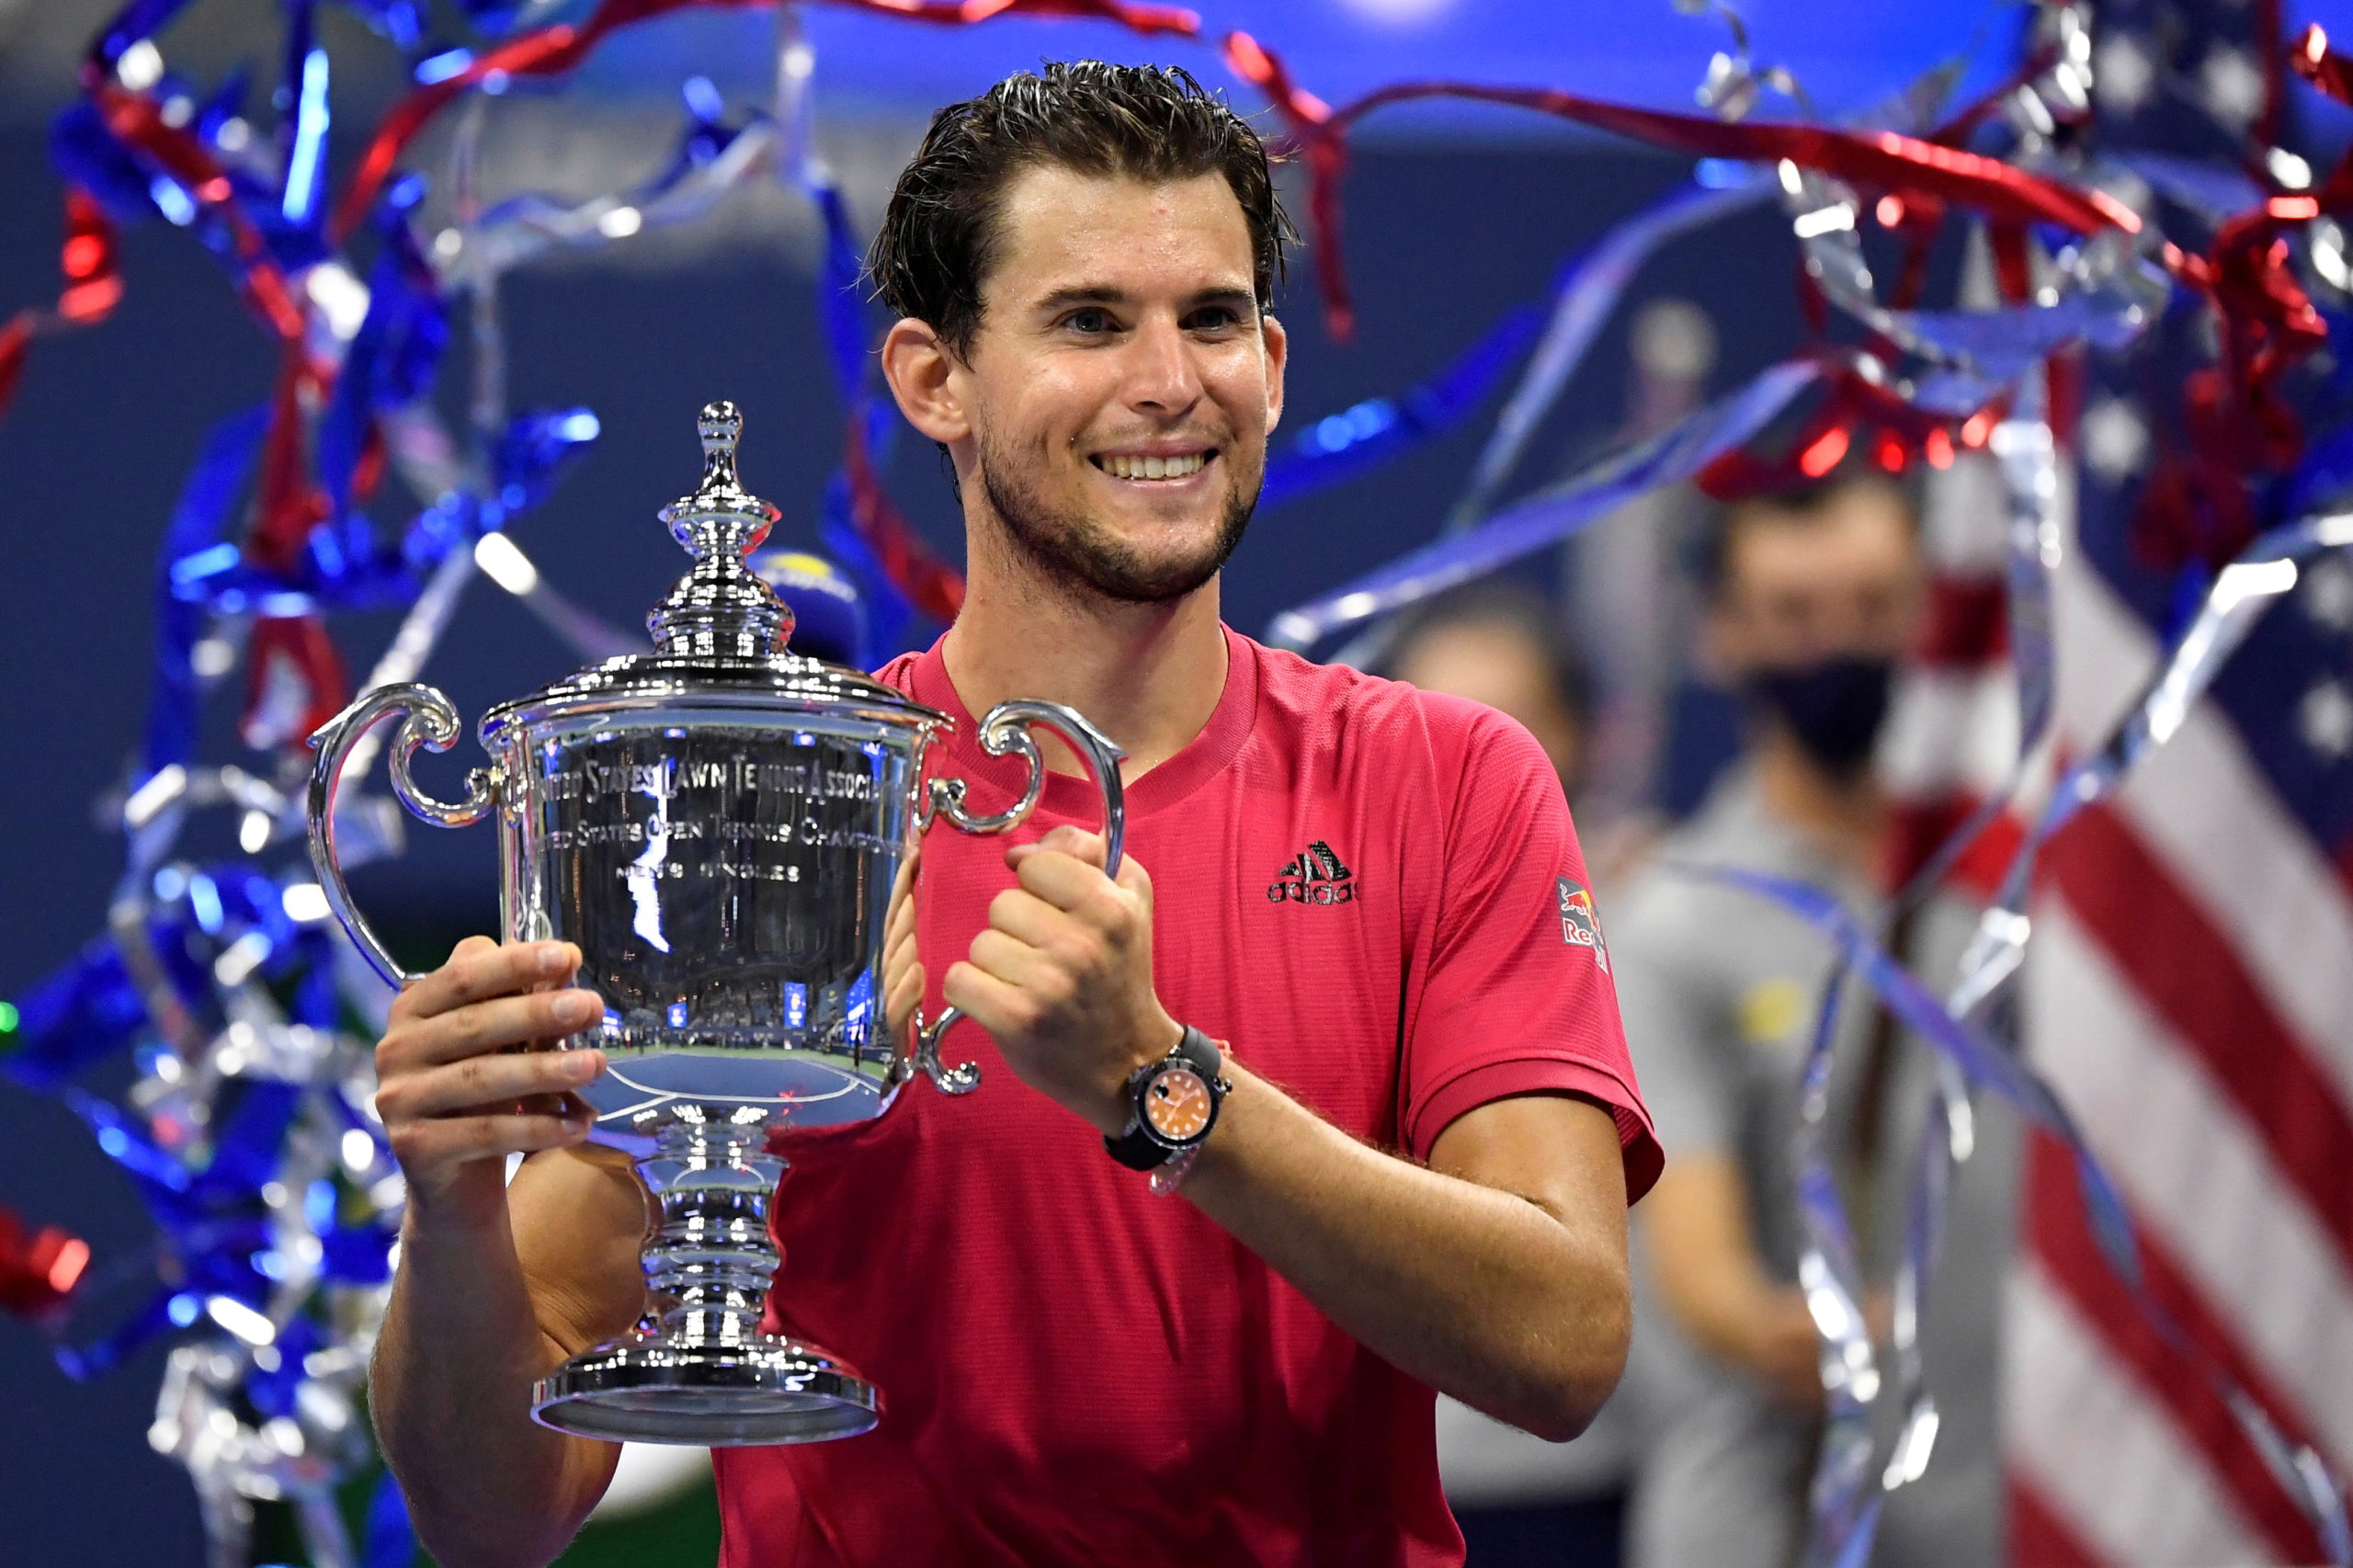 Dominic Thiem of Austria celebrates with the championship trophy after his match against Alexander Zverev of Germany (not pictured) in the men's singles final match on day fourteen of the 2020 U.S. Open tennis tournament at USTA Billie Jean King National Tennis 